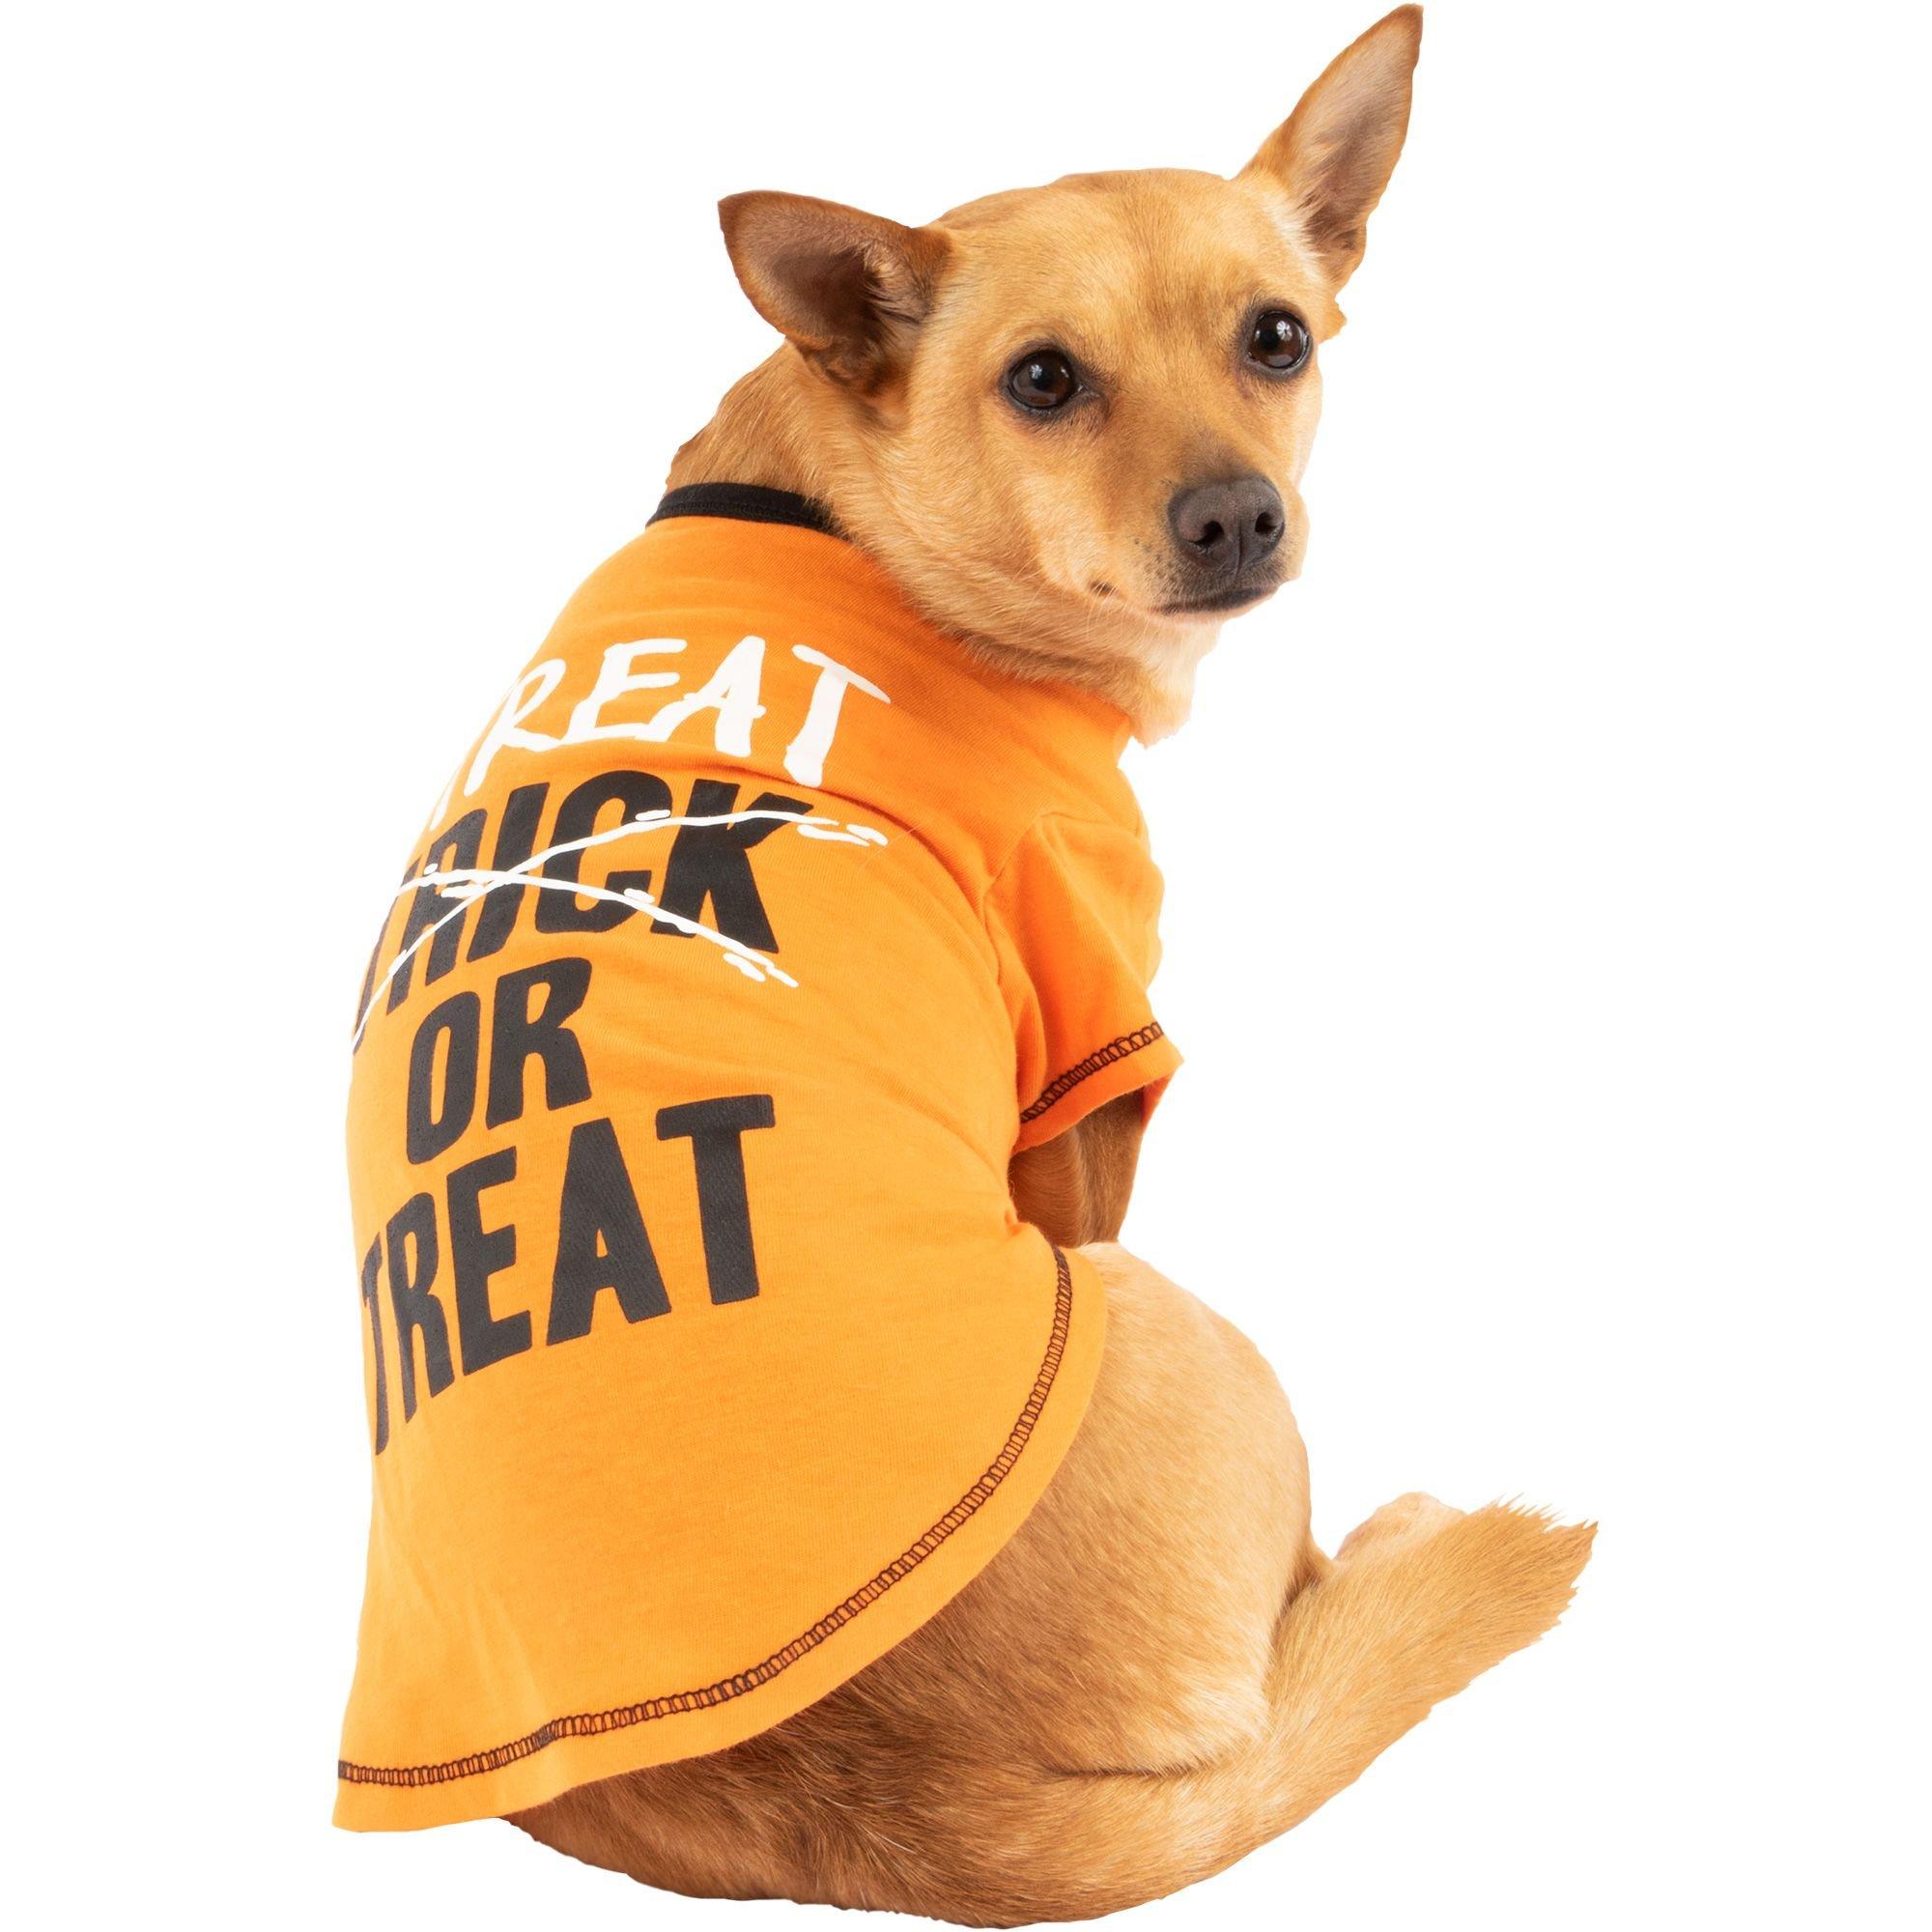 Clothes Dogs Summer Jersey, Basketball Jerseys Dogs